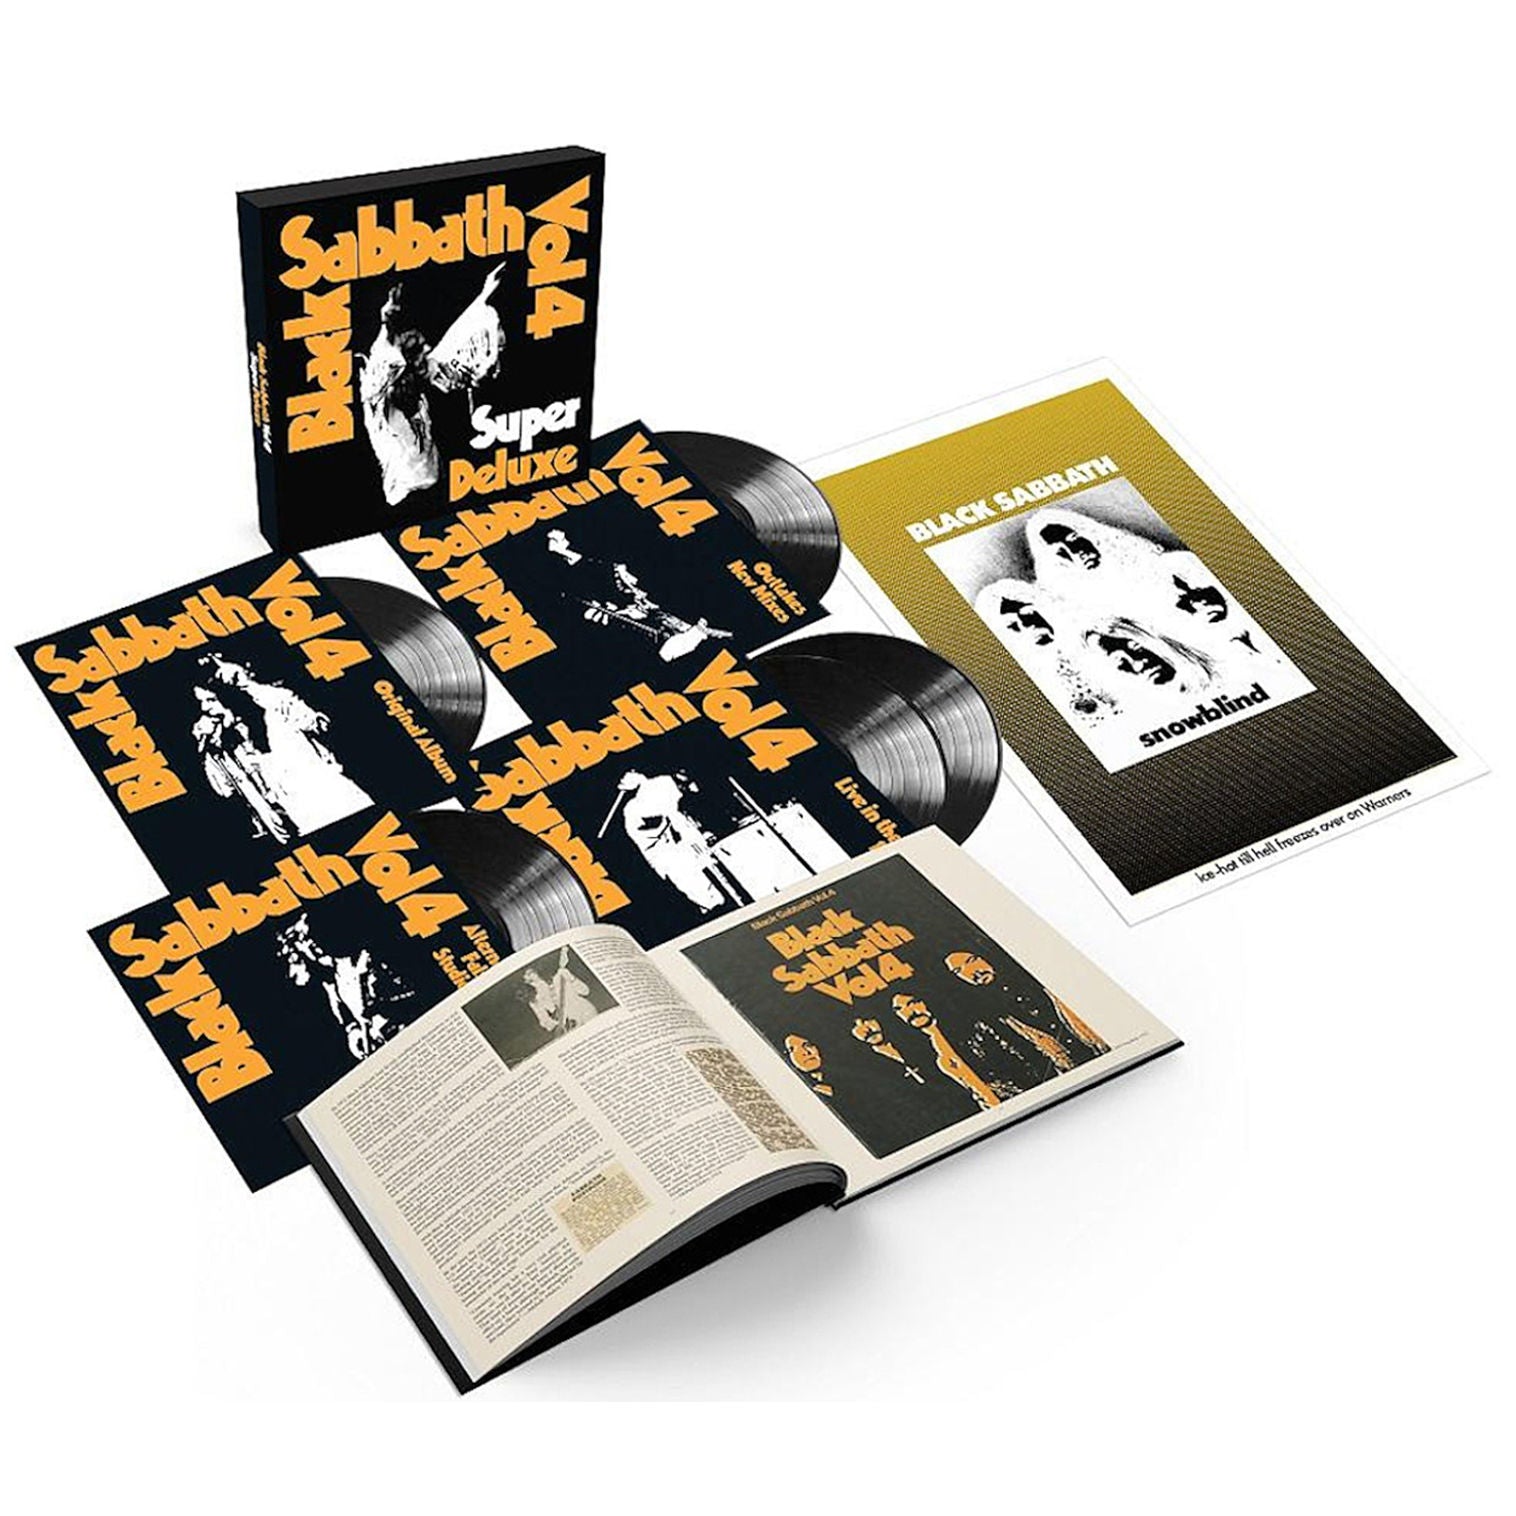 Cahoots 50th Anniversary Super Deluxe Edition